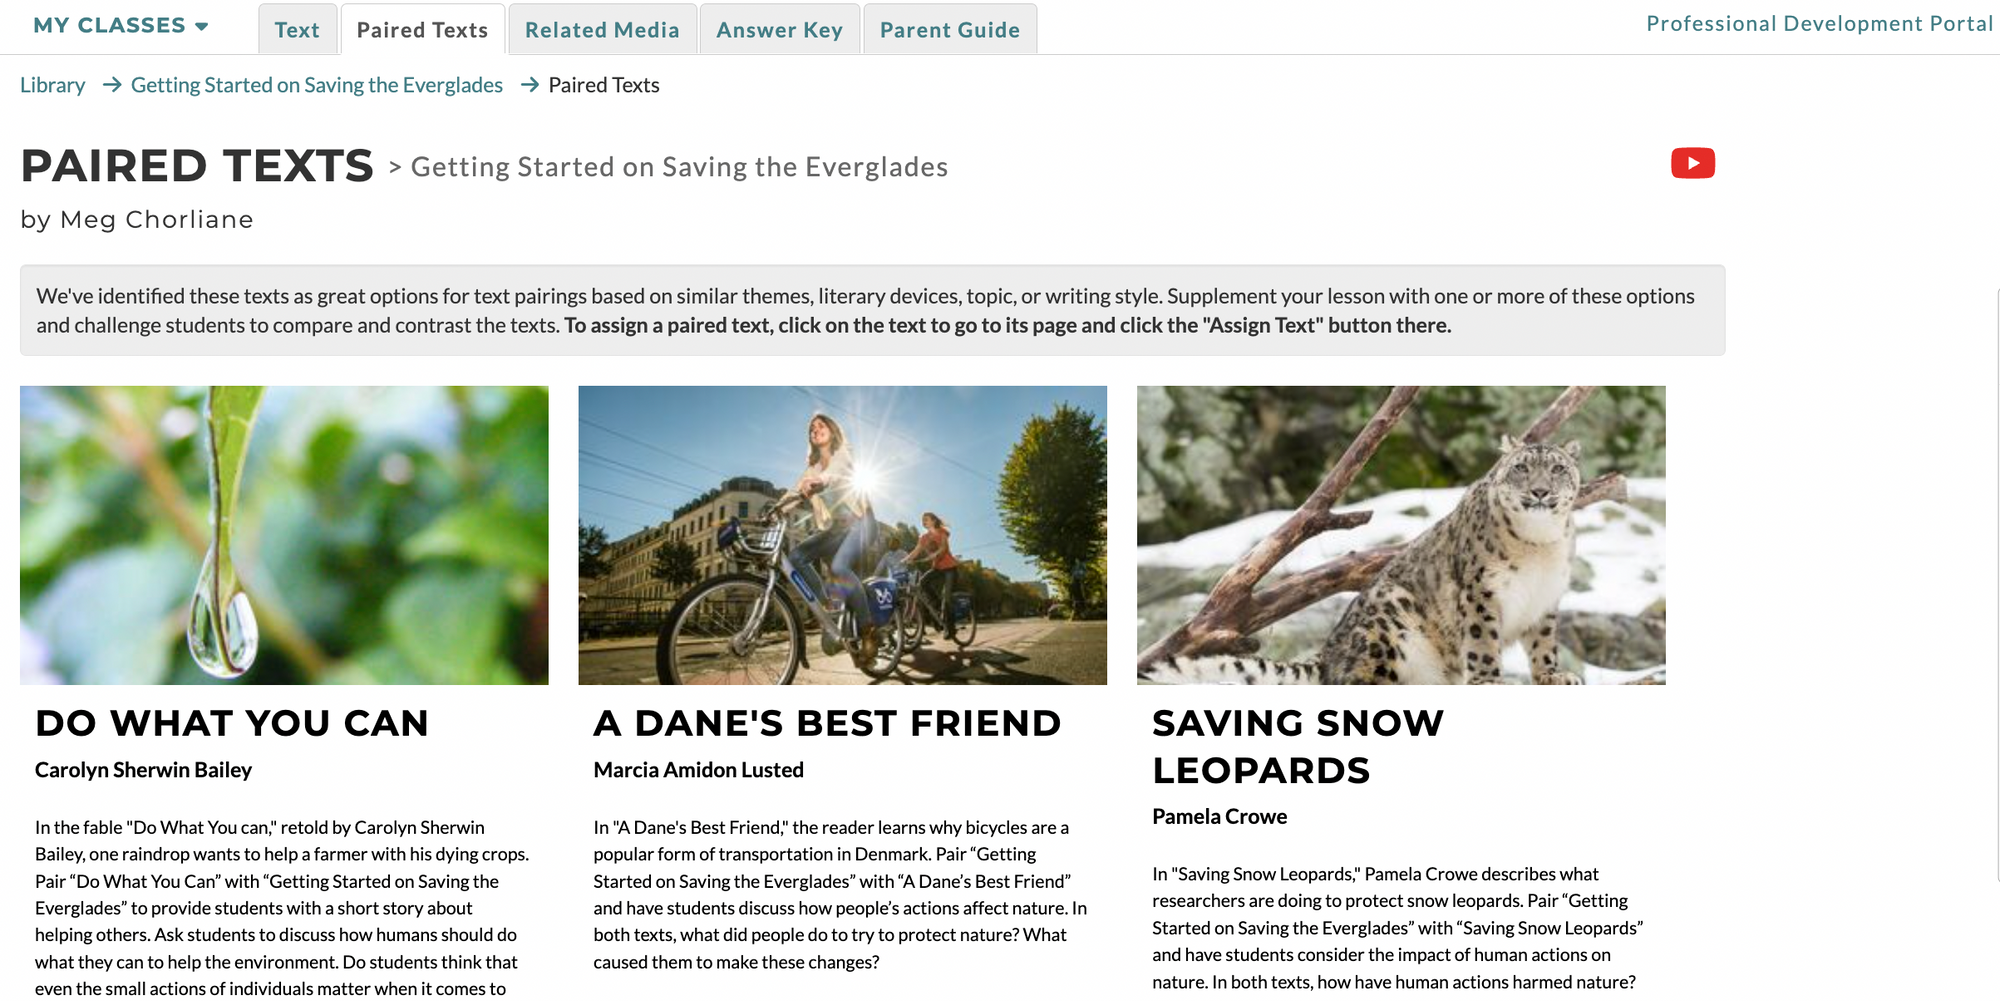 Screenshot of Paired Texts for CommonLit text "Getting Started on Saving the Everglades"